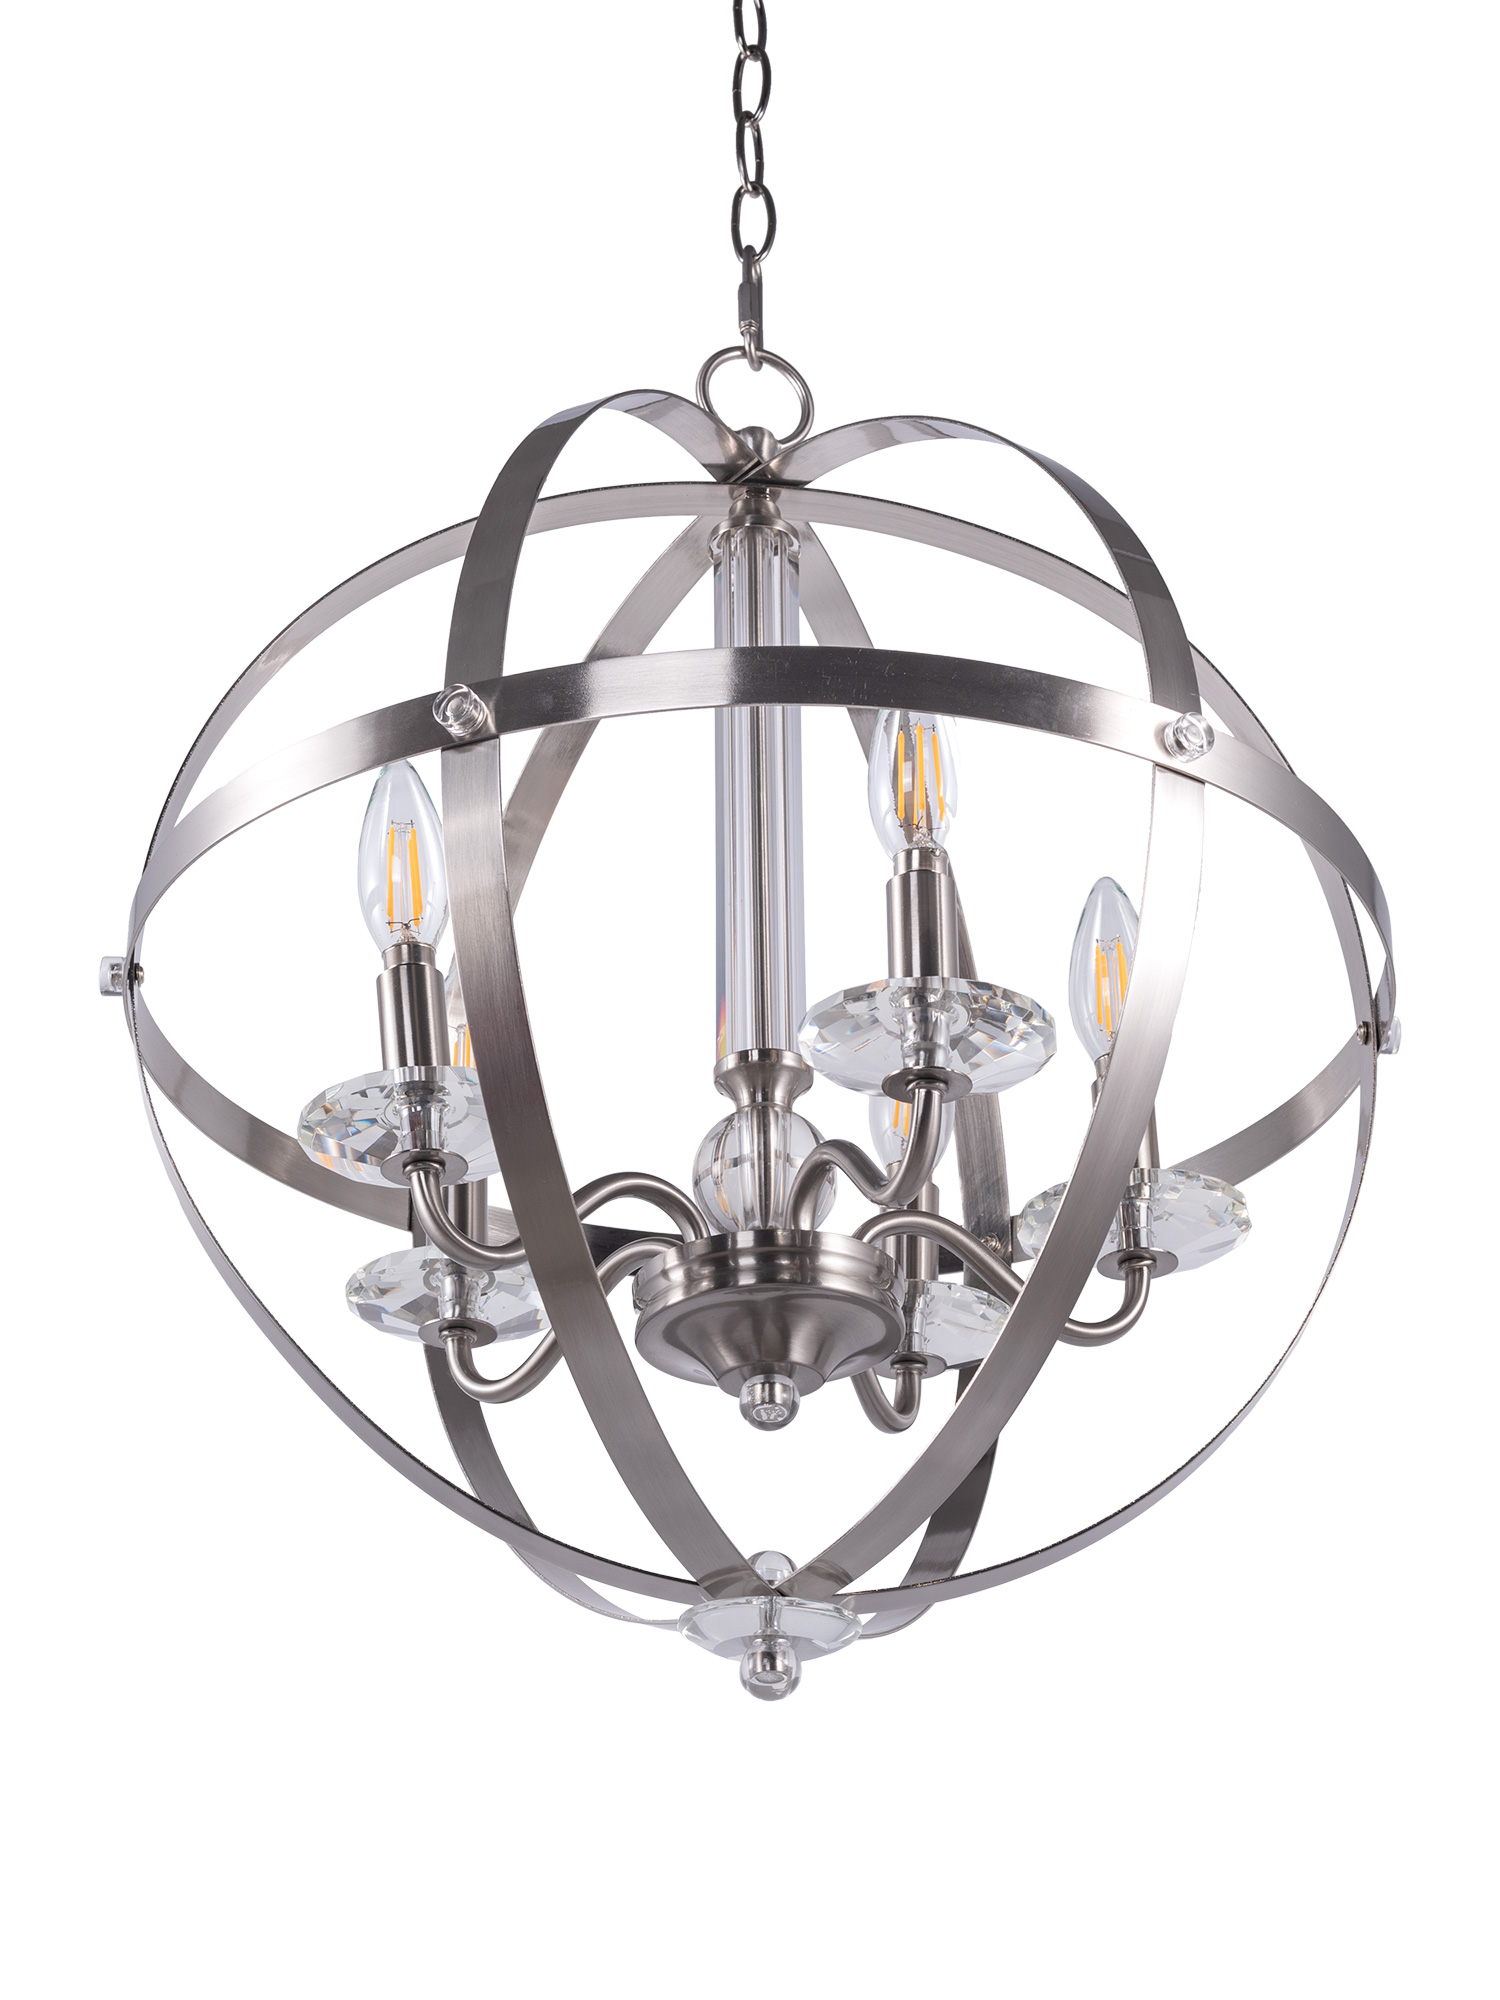 USA-Direct-5-Light-Candle-Style-Globe-Chandelier-Industrial-Rustic-Indoor-Pendant-Light-Without-Bulb-1877125-4